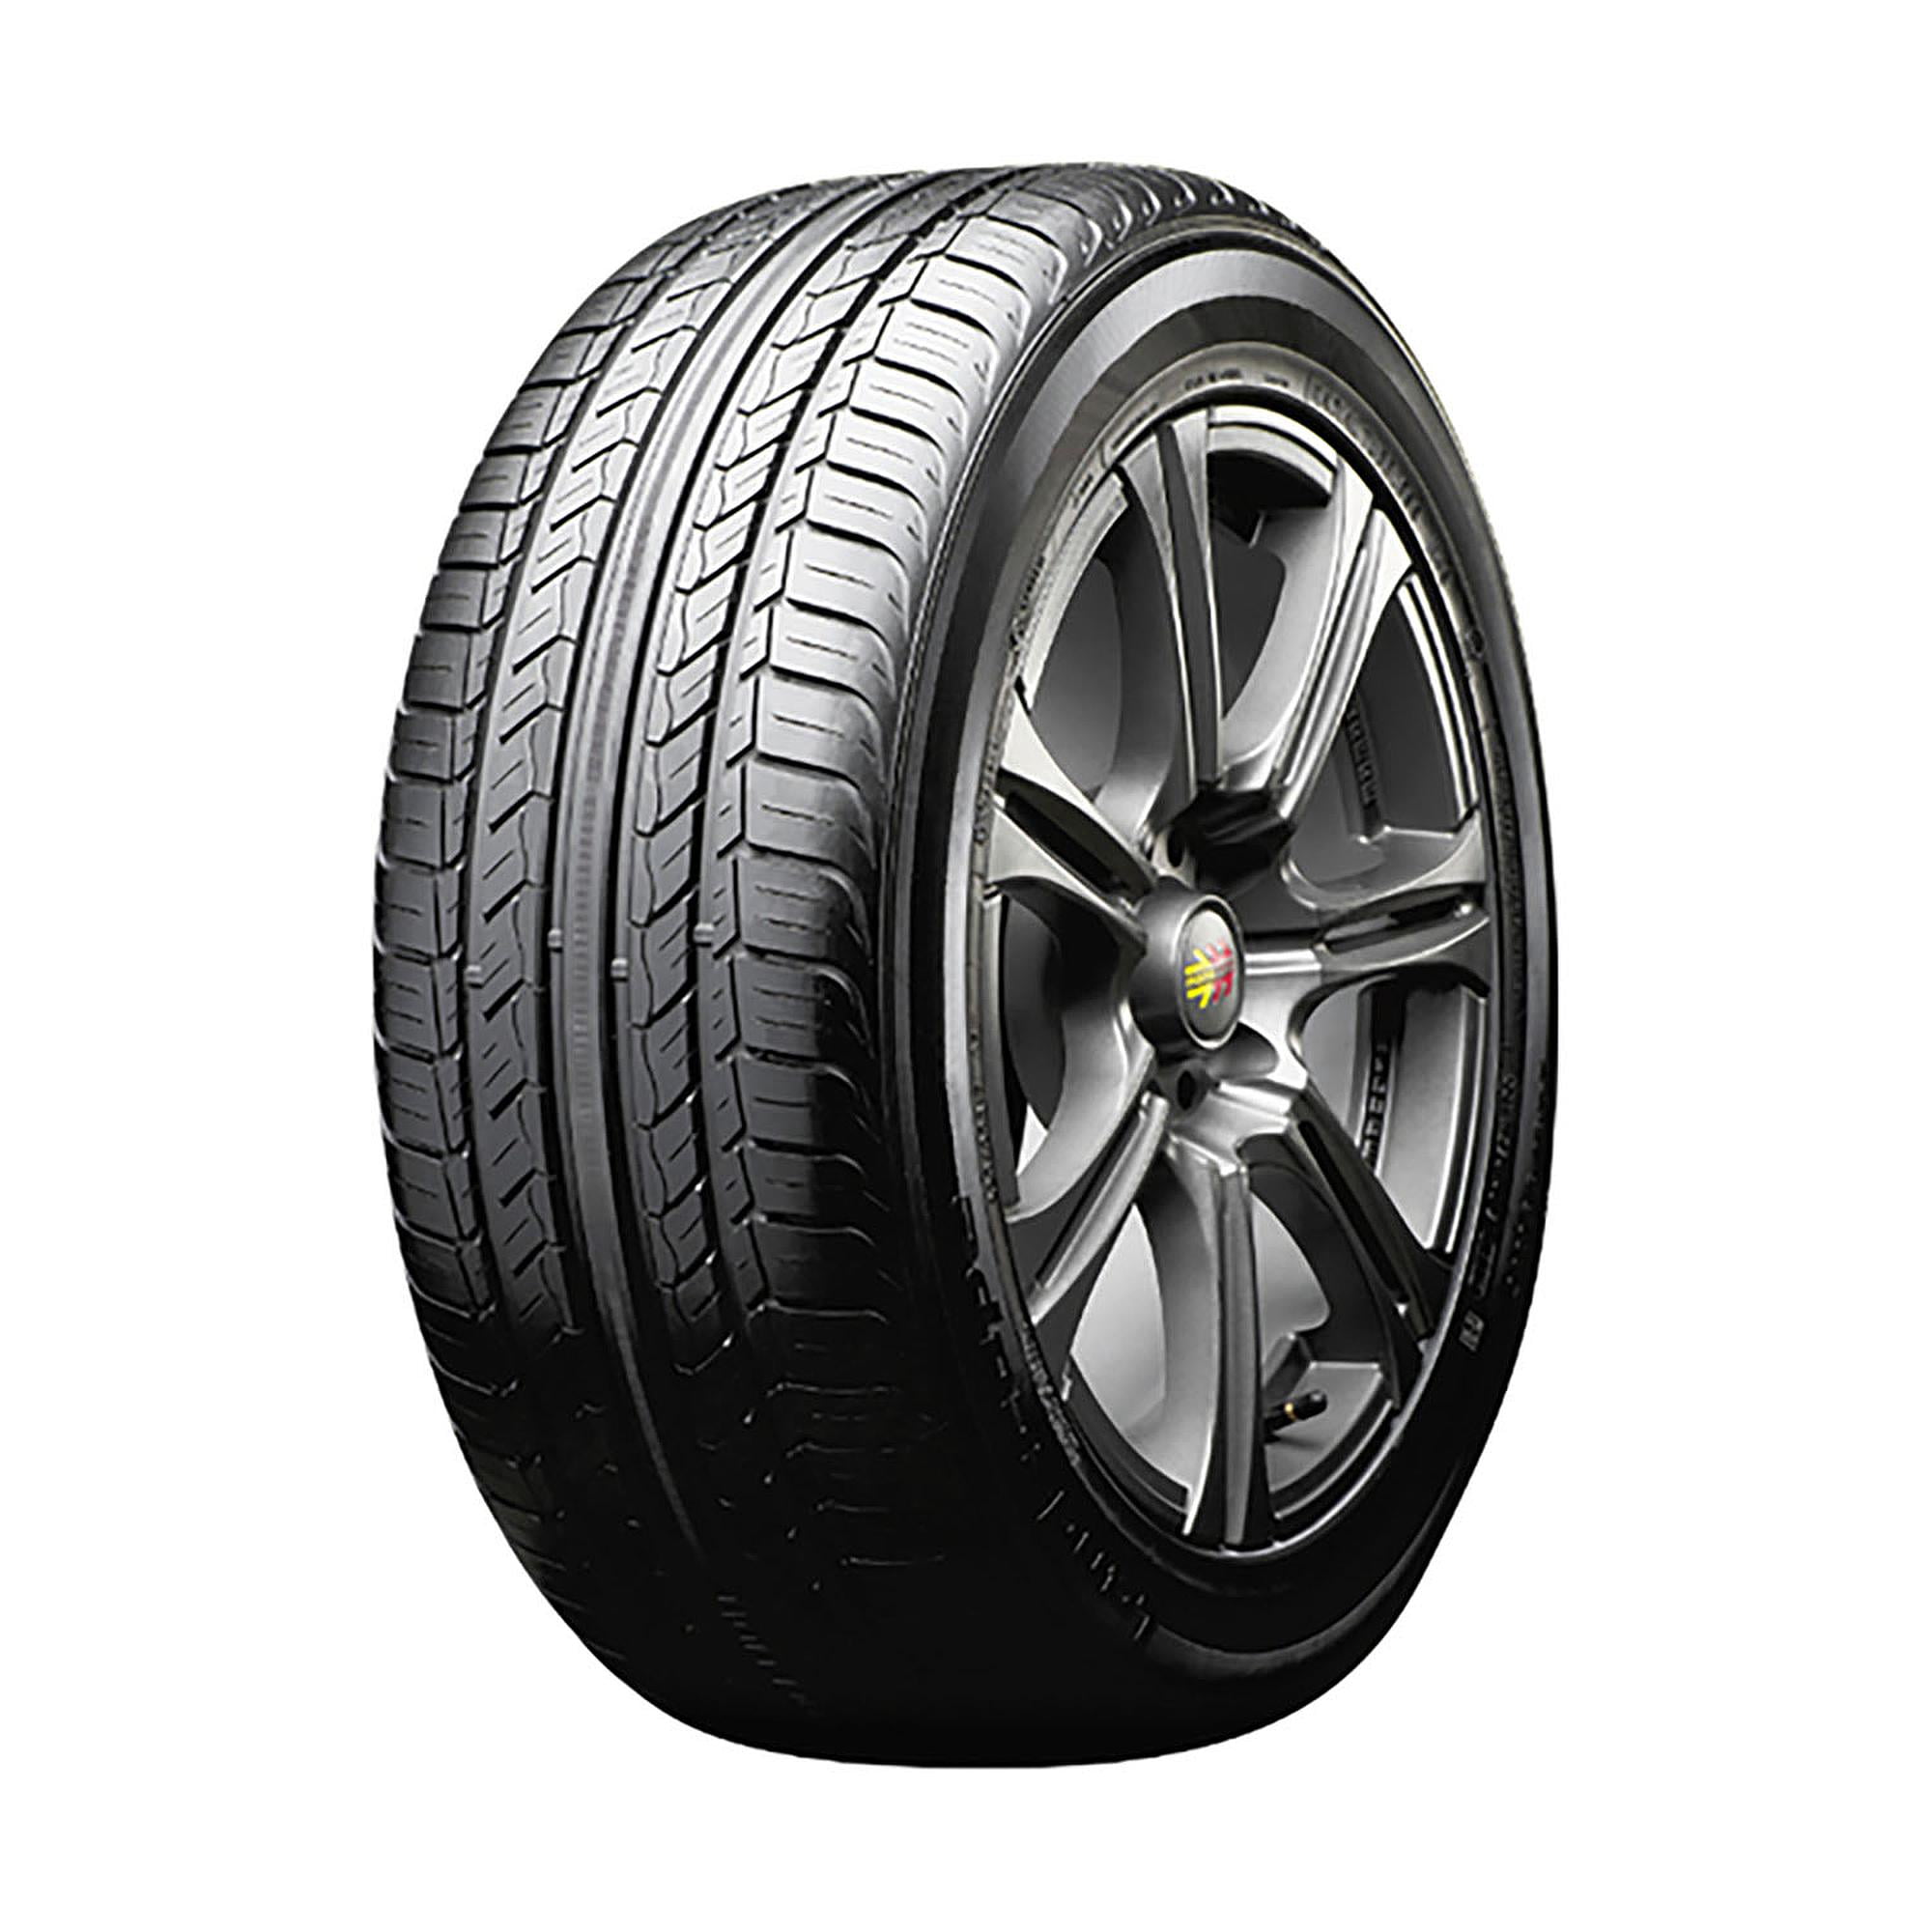 ContiProContact Season All 89V Continental BSW Tire 205/50R17